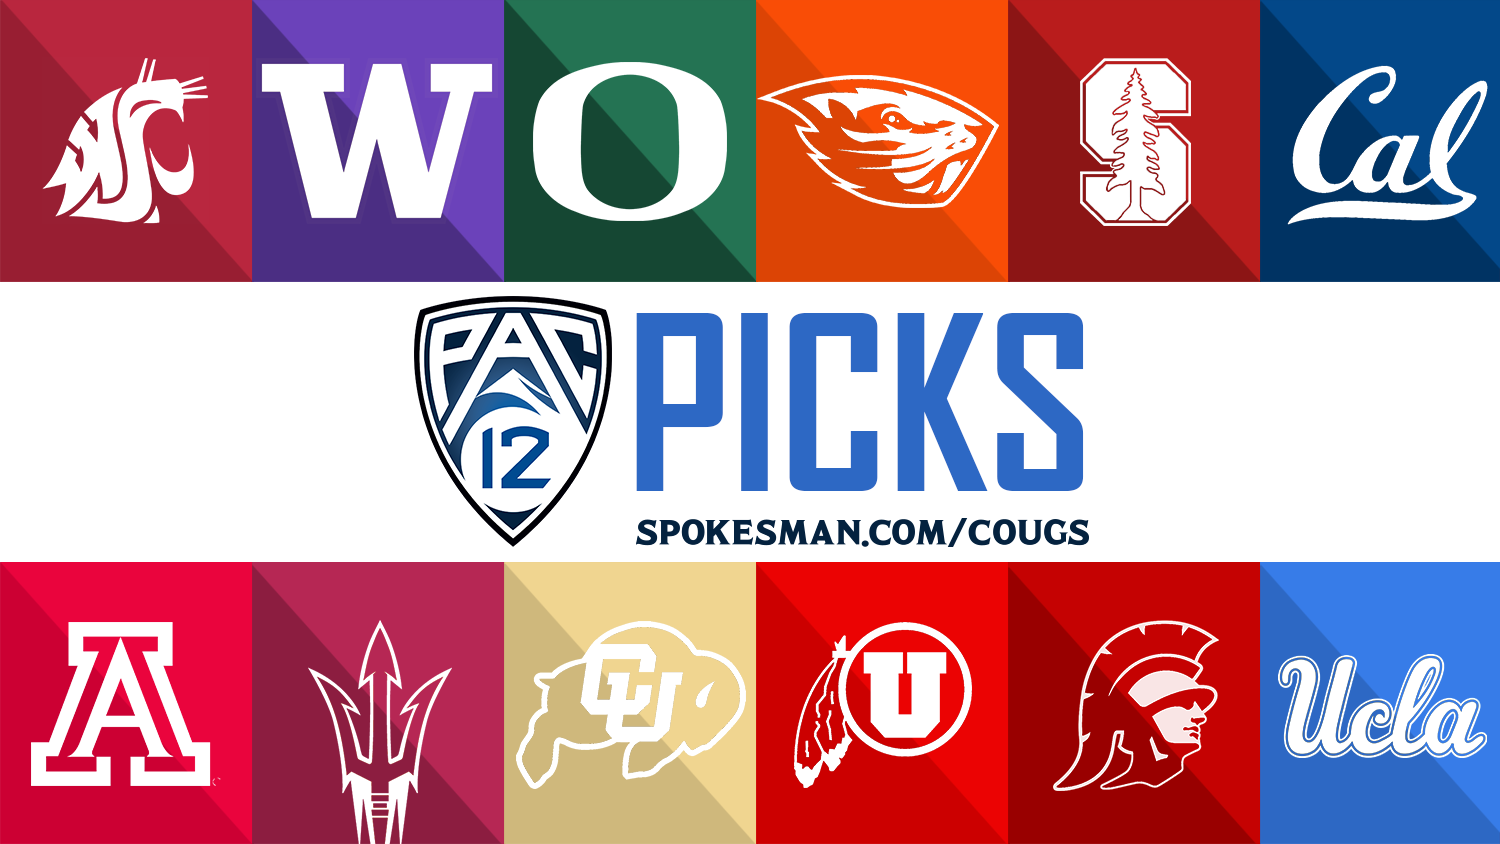 Pac12 picks Postseason eligibility still on the table for 12 teams